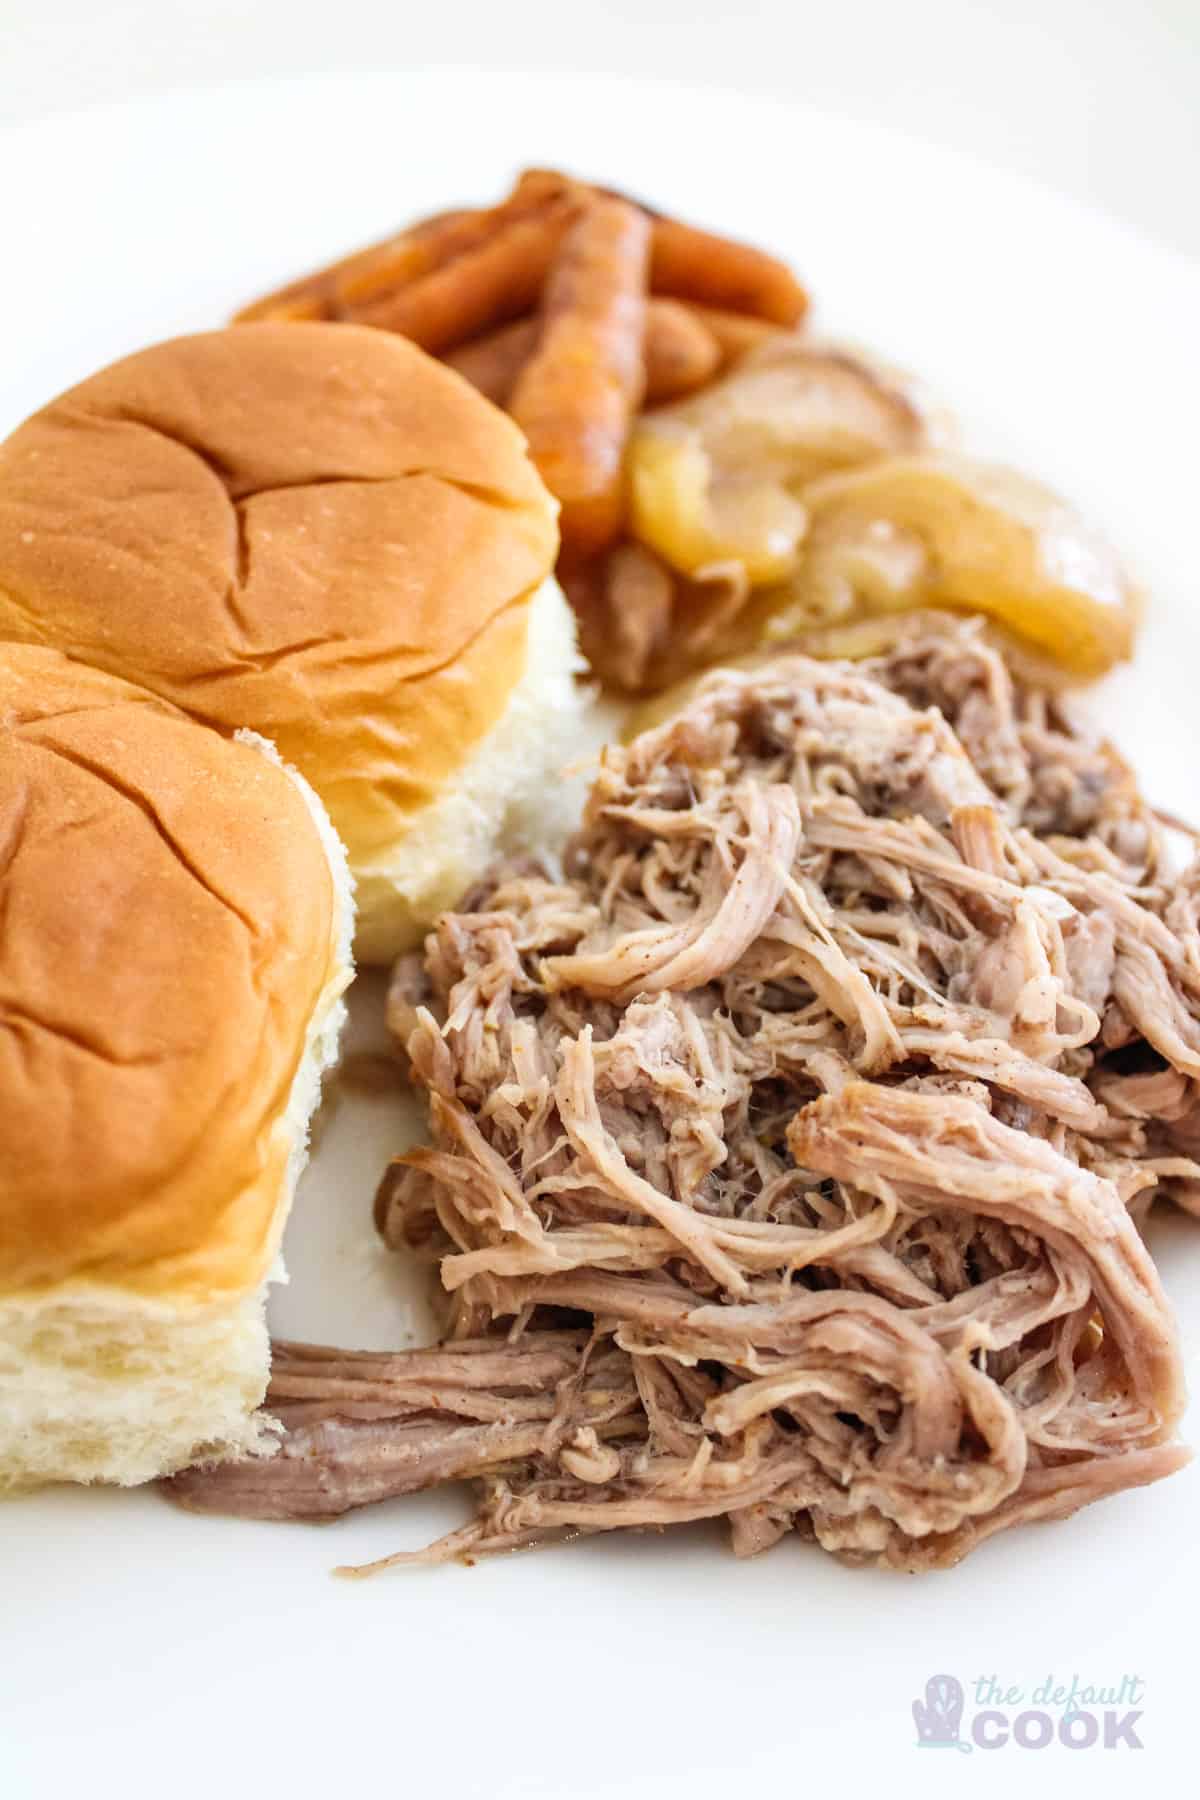 Pulled pork on white plate with onions, carrots, and hawaiian rolls.